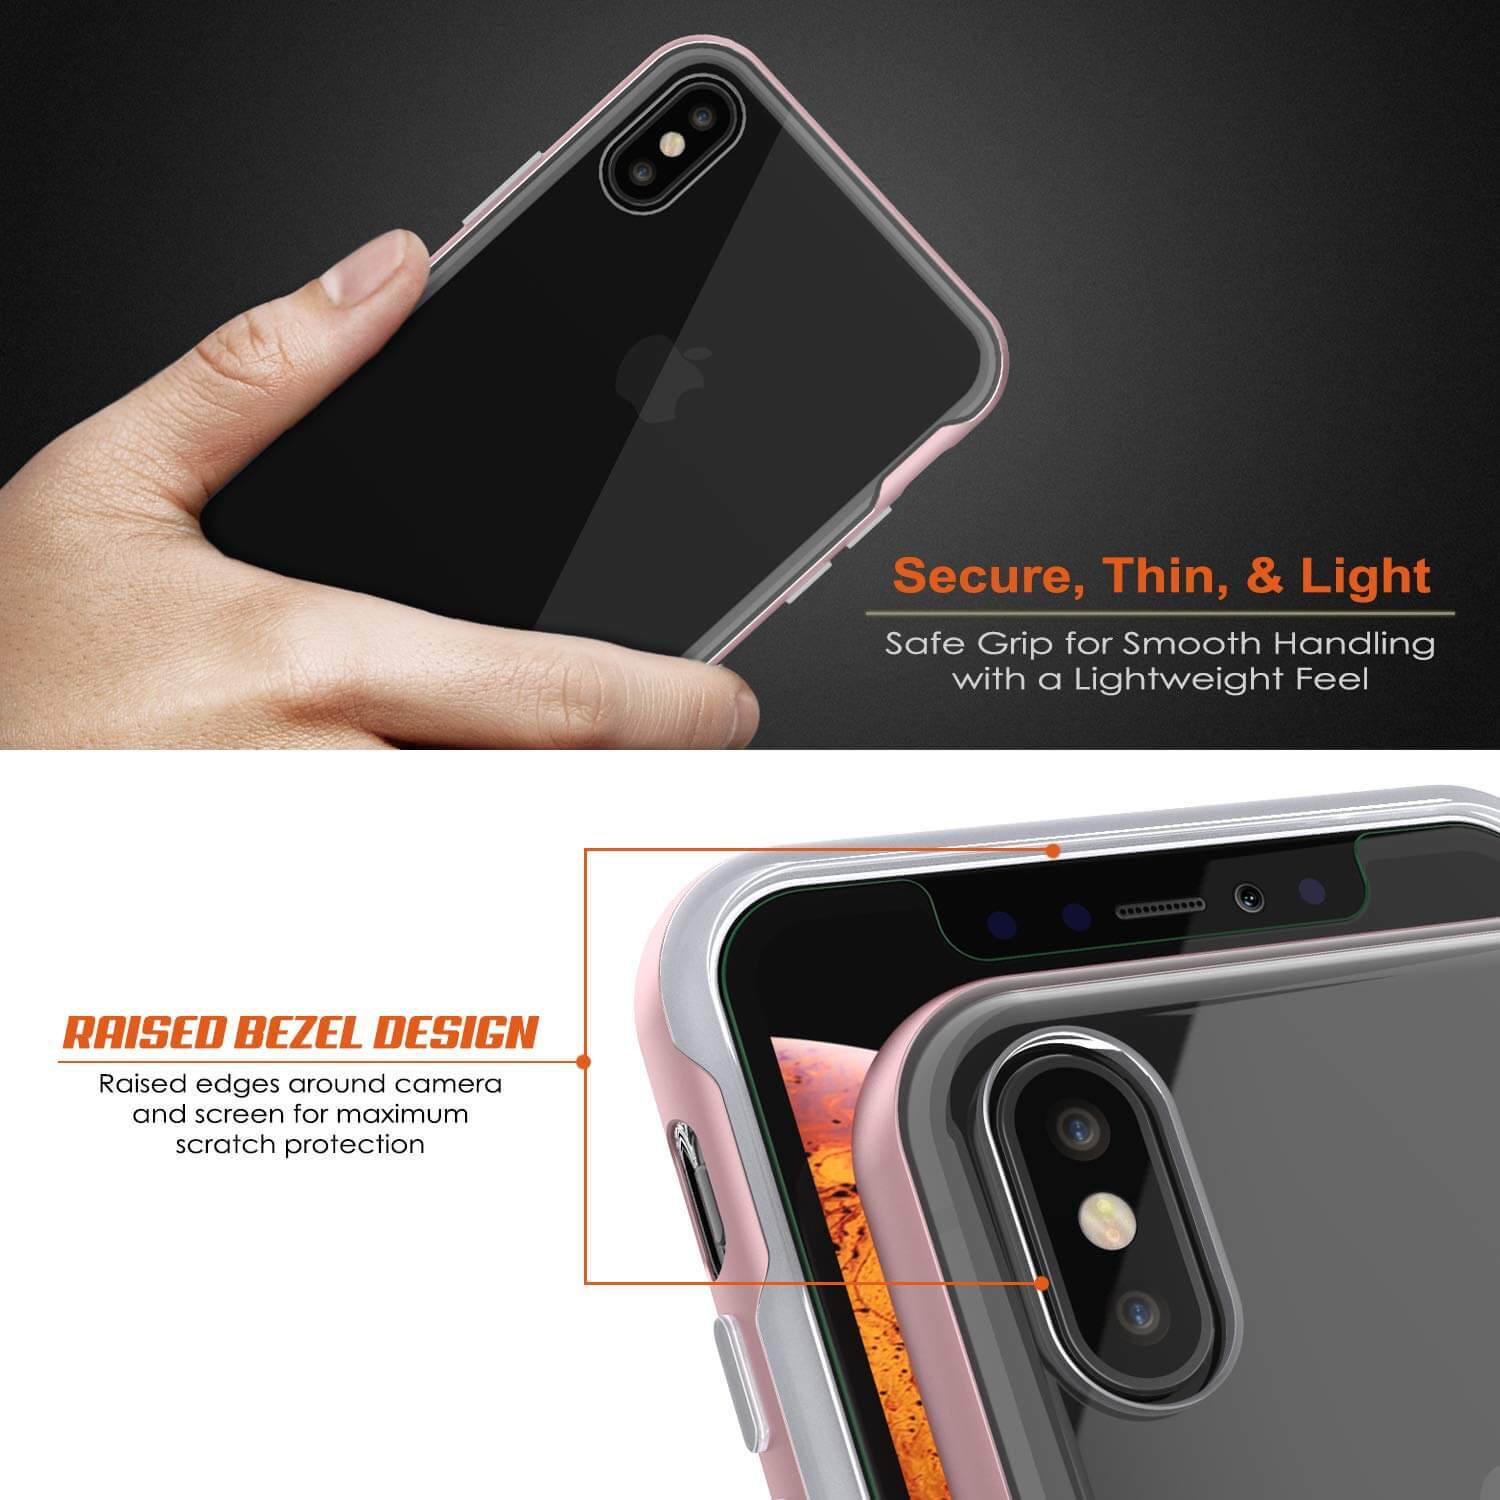 iPhone X Case, PUNKcase [LUCID 3.0 Series] [Slim Fit] Armor Cover w/ Integrated Screen Protector [Rose Gold]